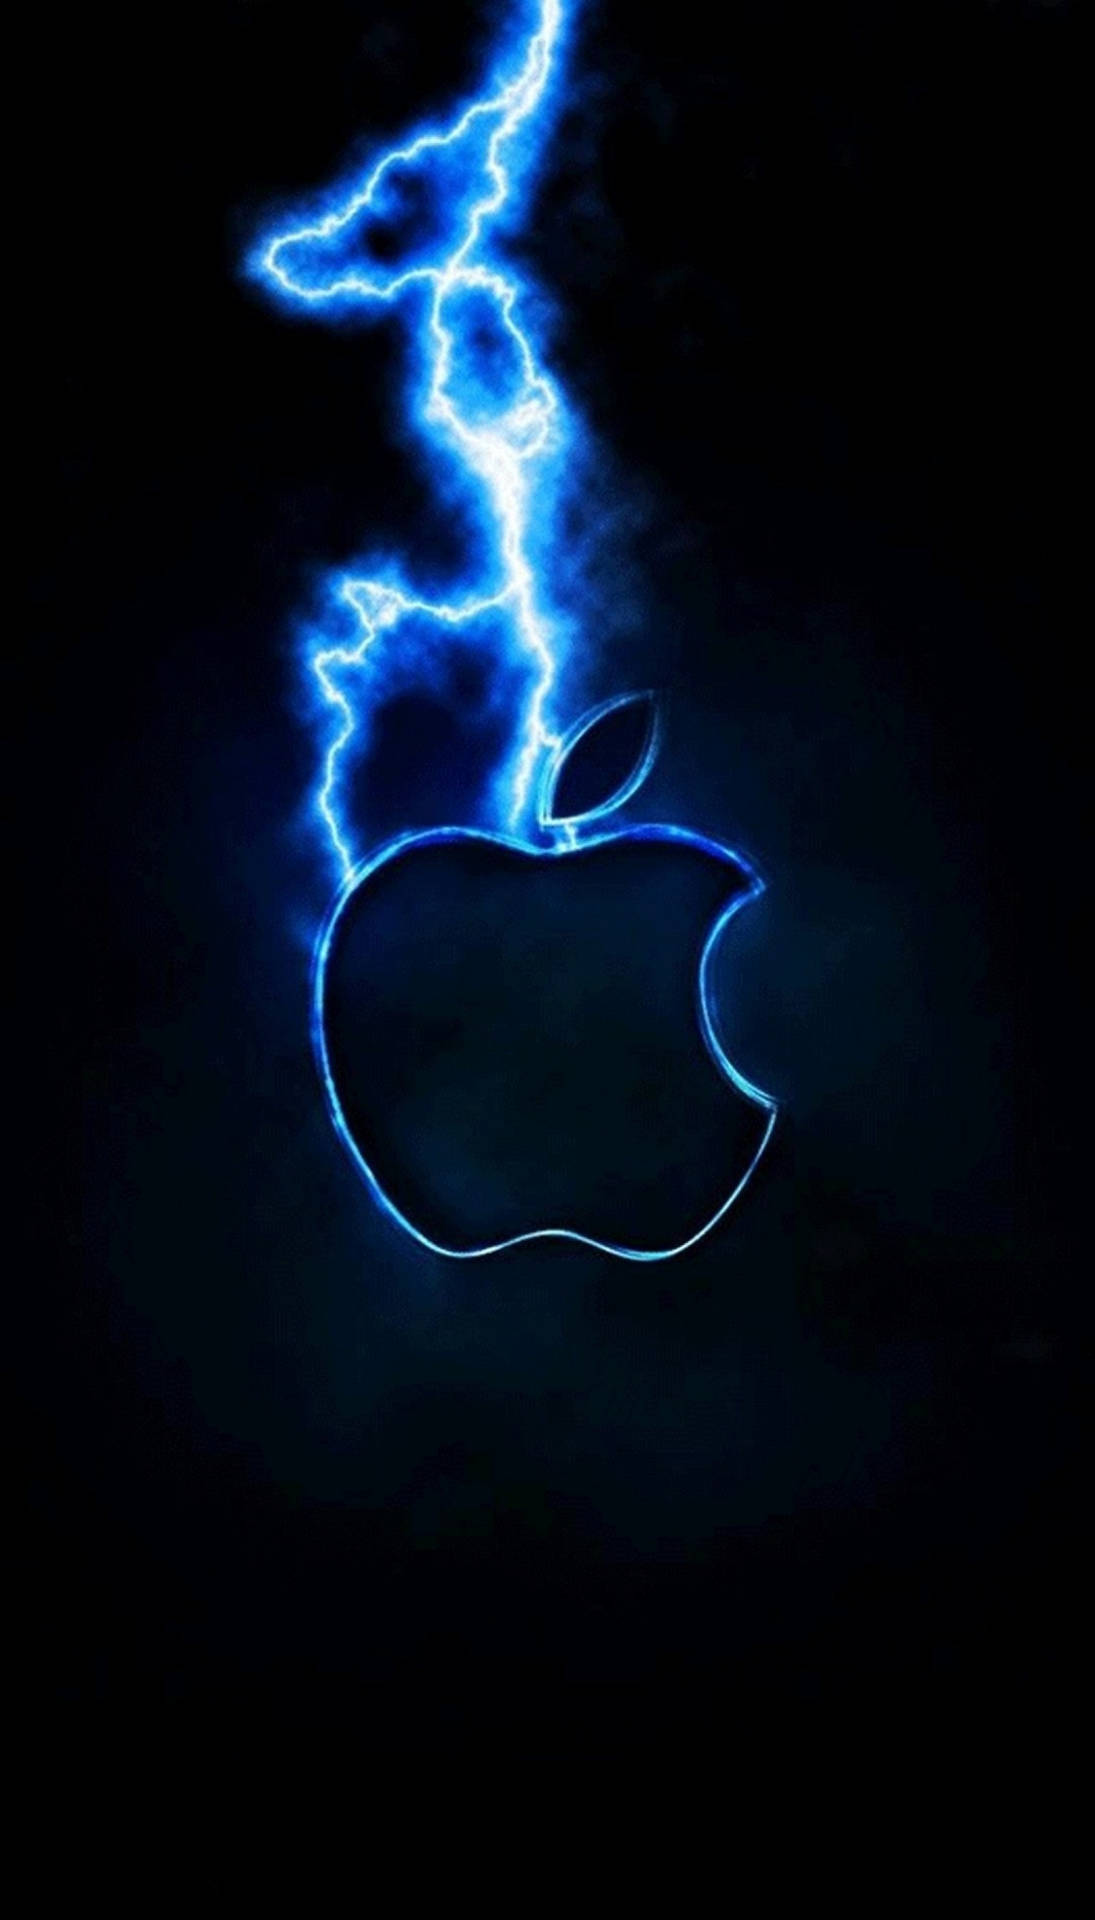 iPod touch Wallpapers  Basic Apple Guy